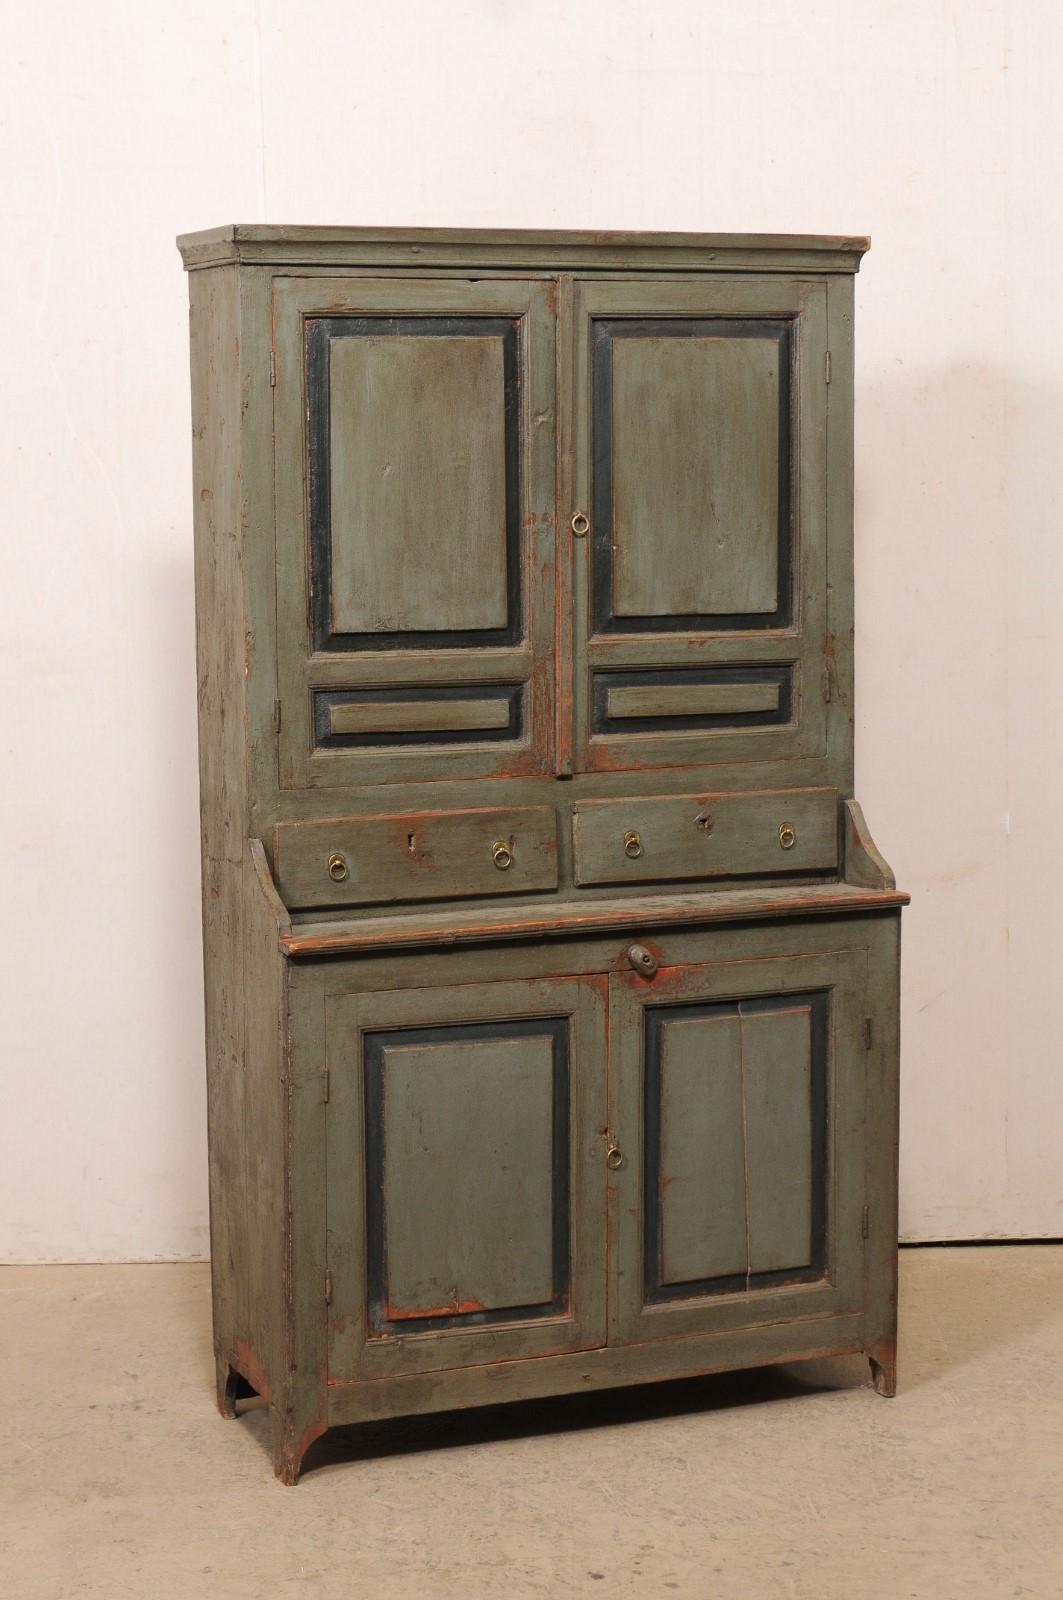 A Swedish painted wood cupboard cabinet in green from the 19th century. This tall antique storage cabinet from Sweden offers plentiful storage opportunities! The more slender, upper section, which sits recessed back over the lower section, is fitted